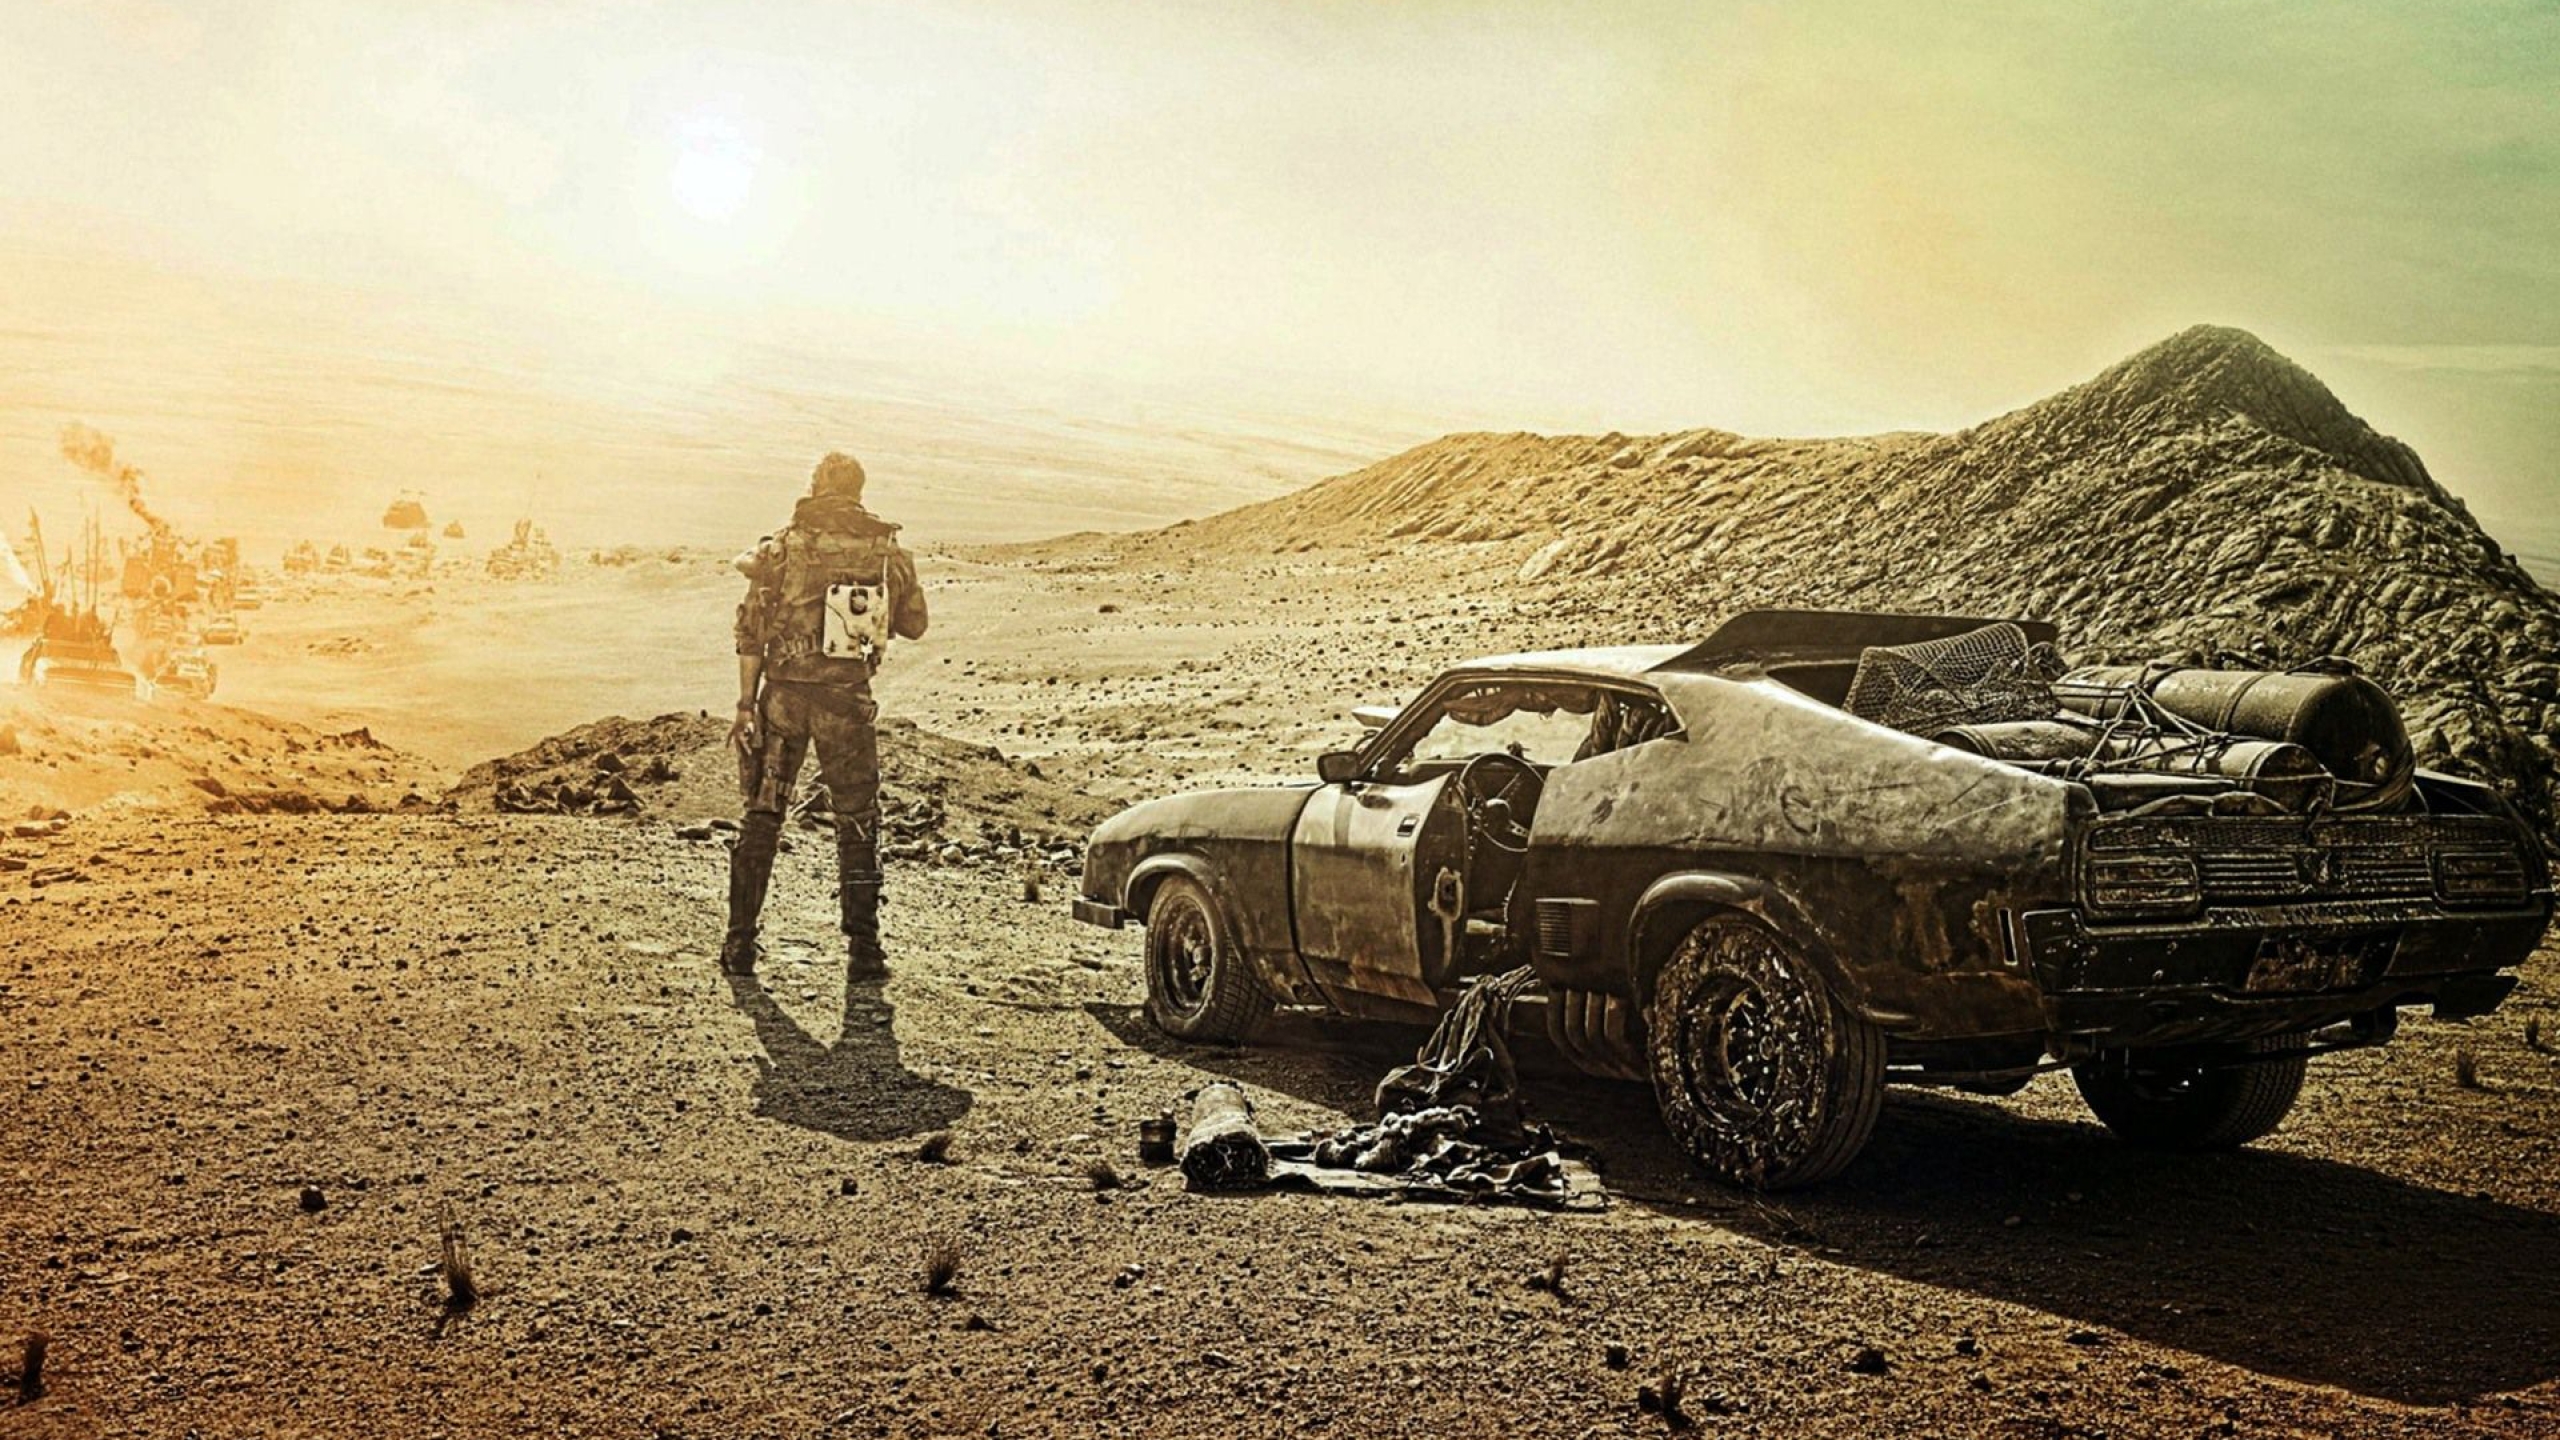 mad max fury road wallpapers